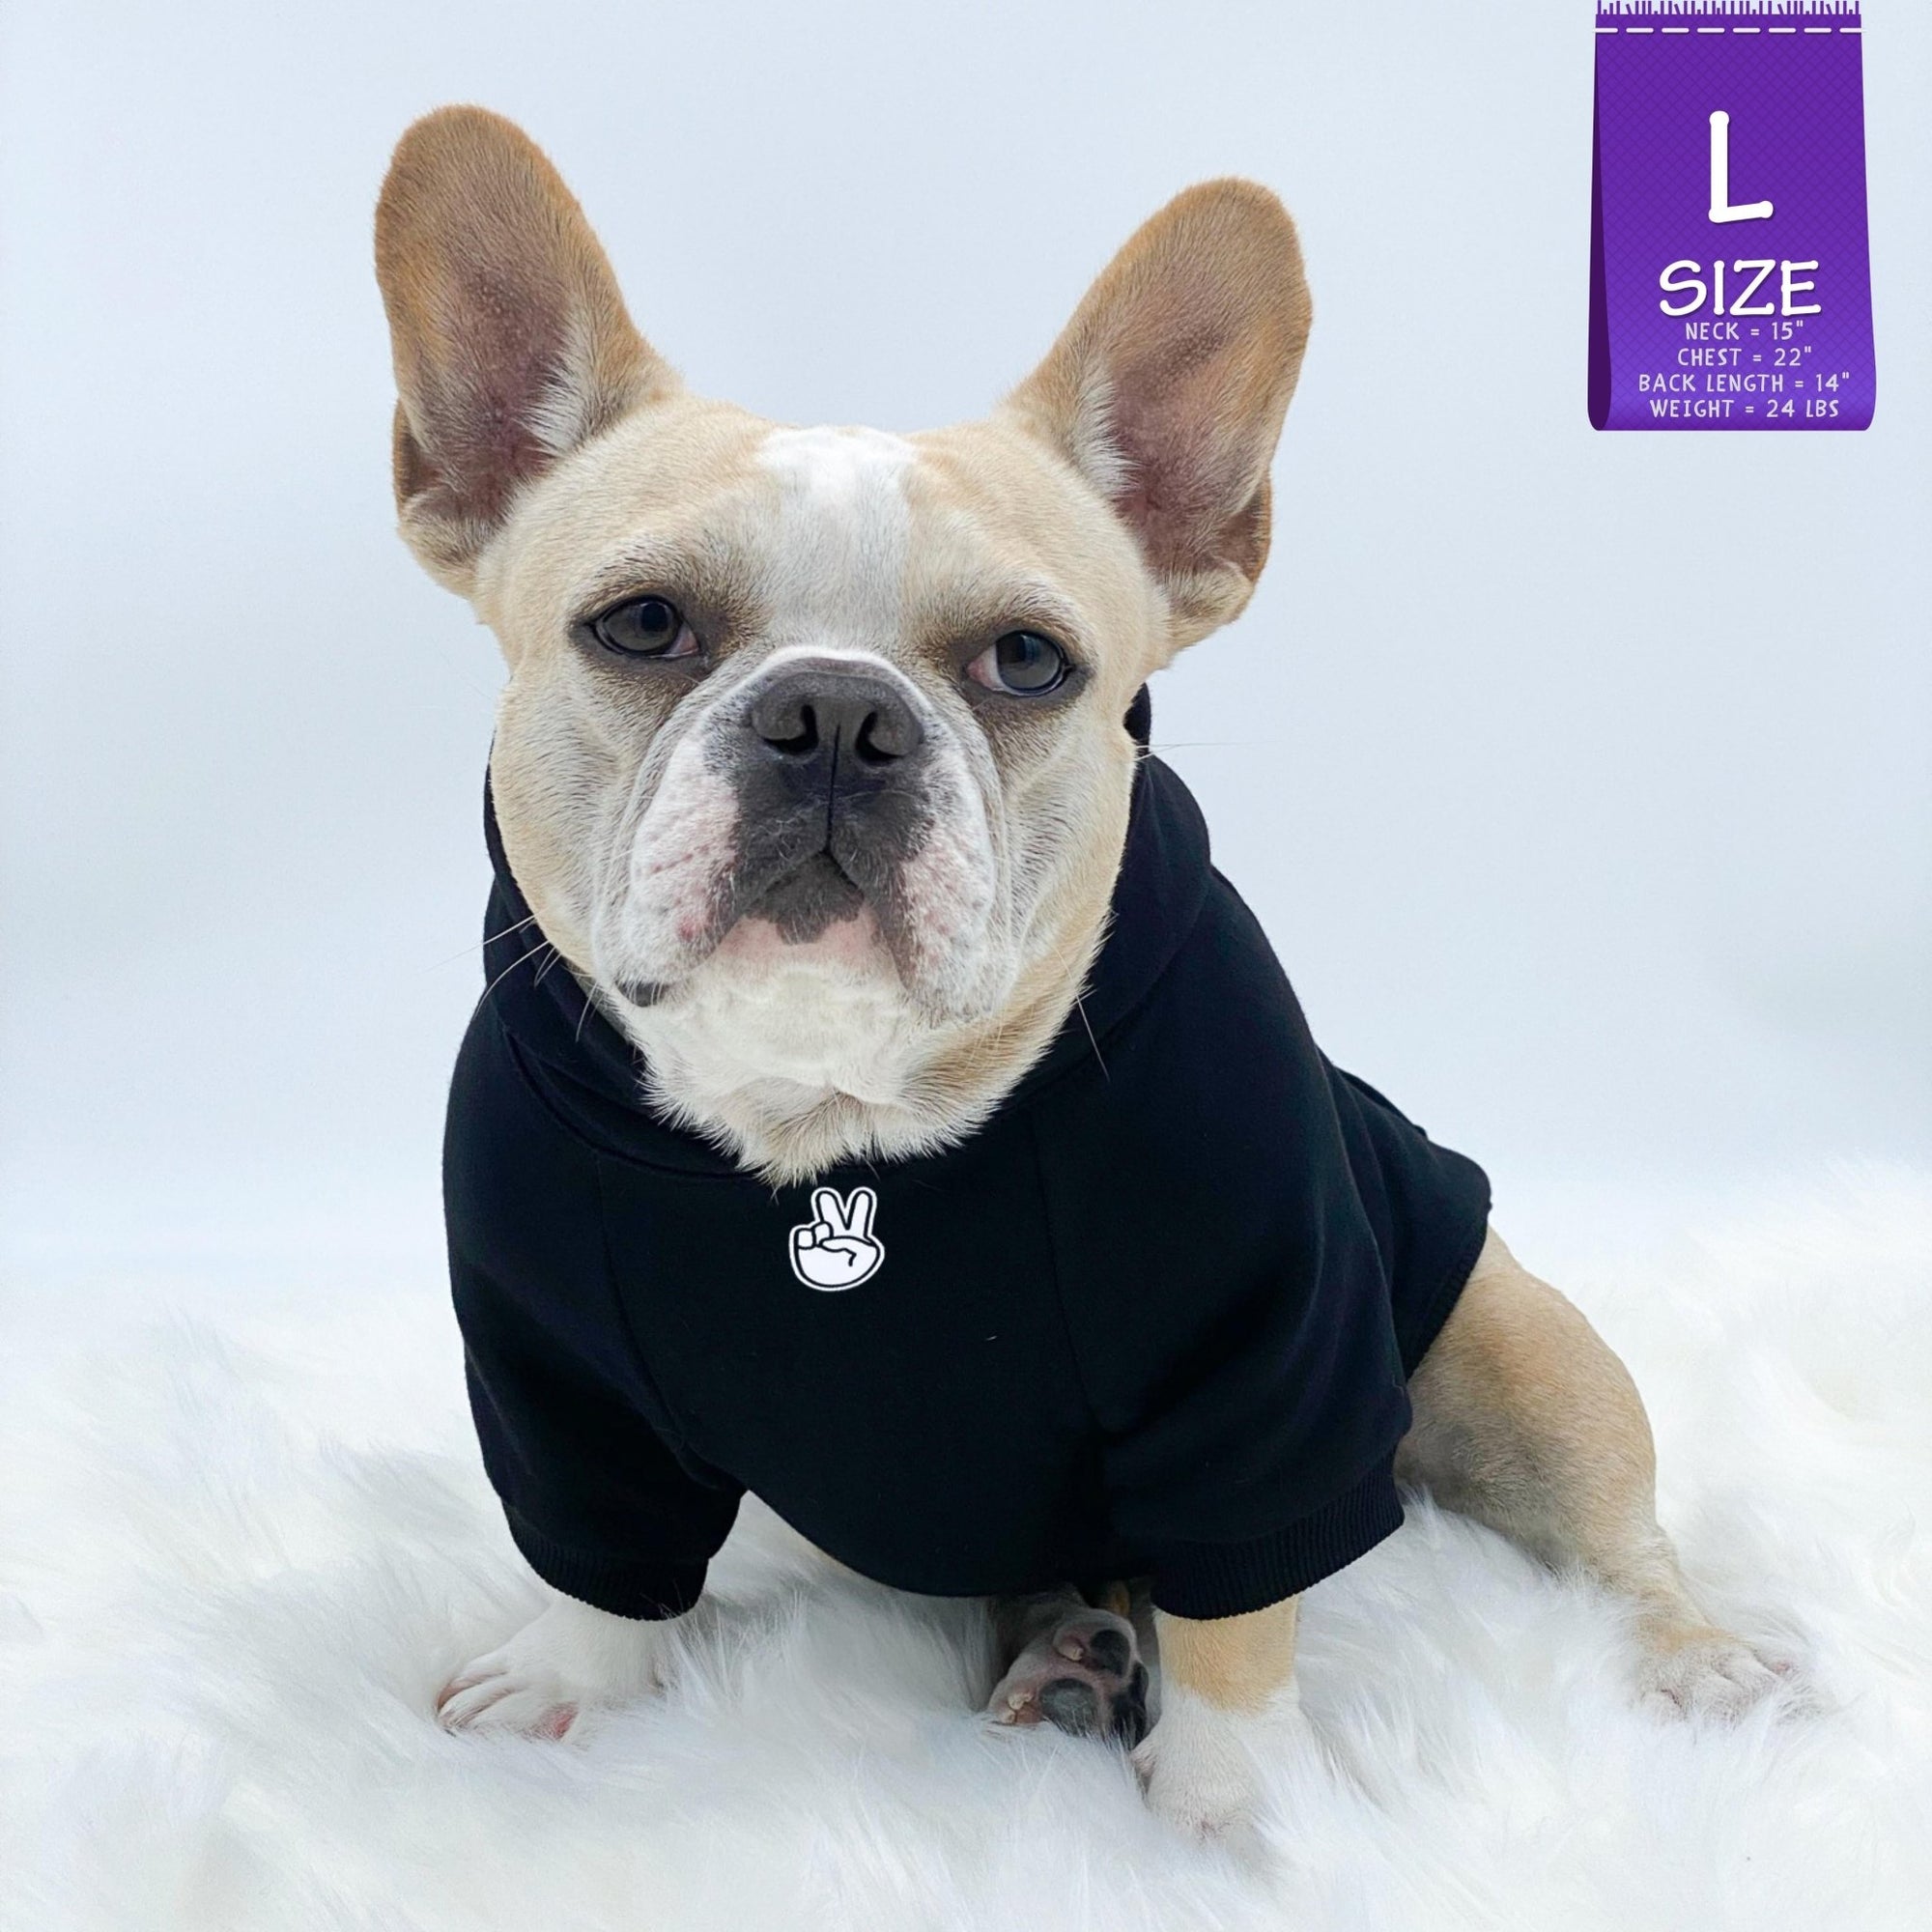 Dog Hoodie - Hoodies For Dogs - French Bulldog wearing &quot;Good Life&quot; dog hoodie in black - finger peace sign emoji on front chest in white - sitting down against solid white background - Wag Trendz